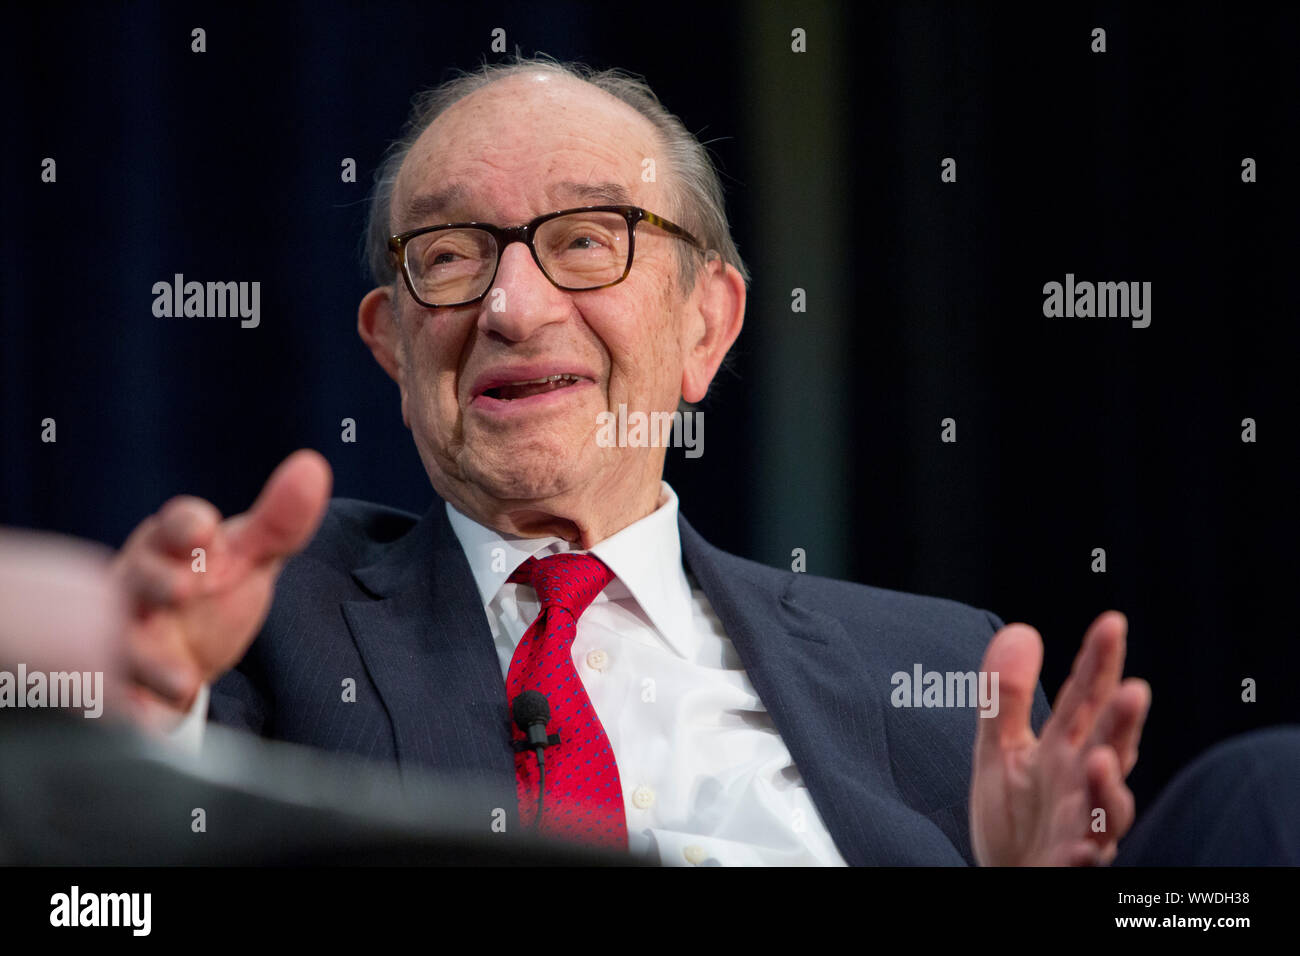 Former Chair of the Federal Reserve of the United States, Alan Greenspan speaks at a conference at the National Association of Business Economics, NABE. Stock Photo